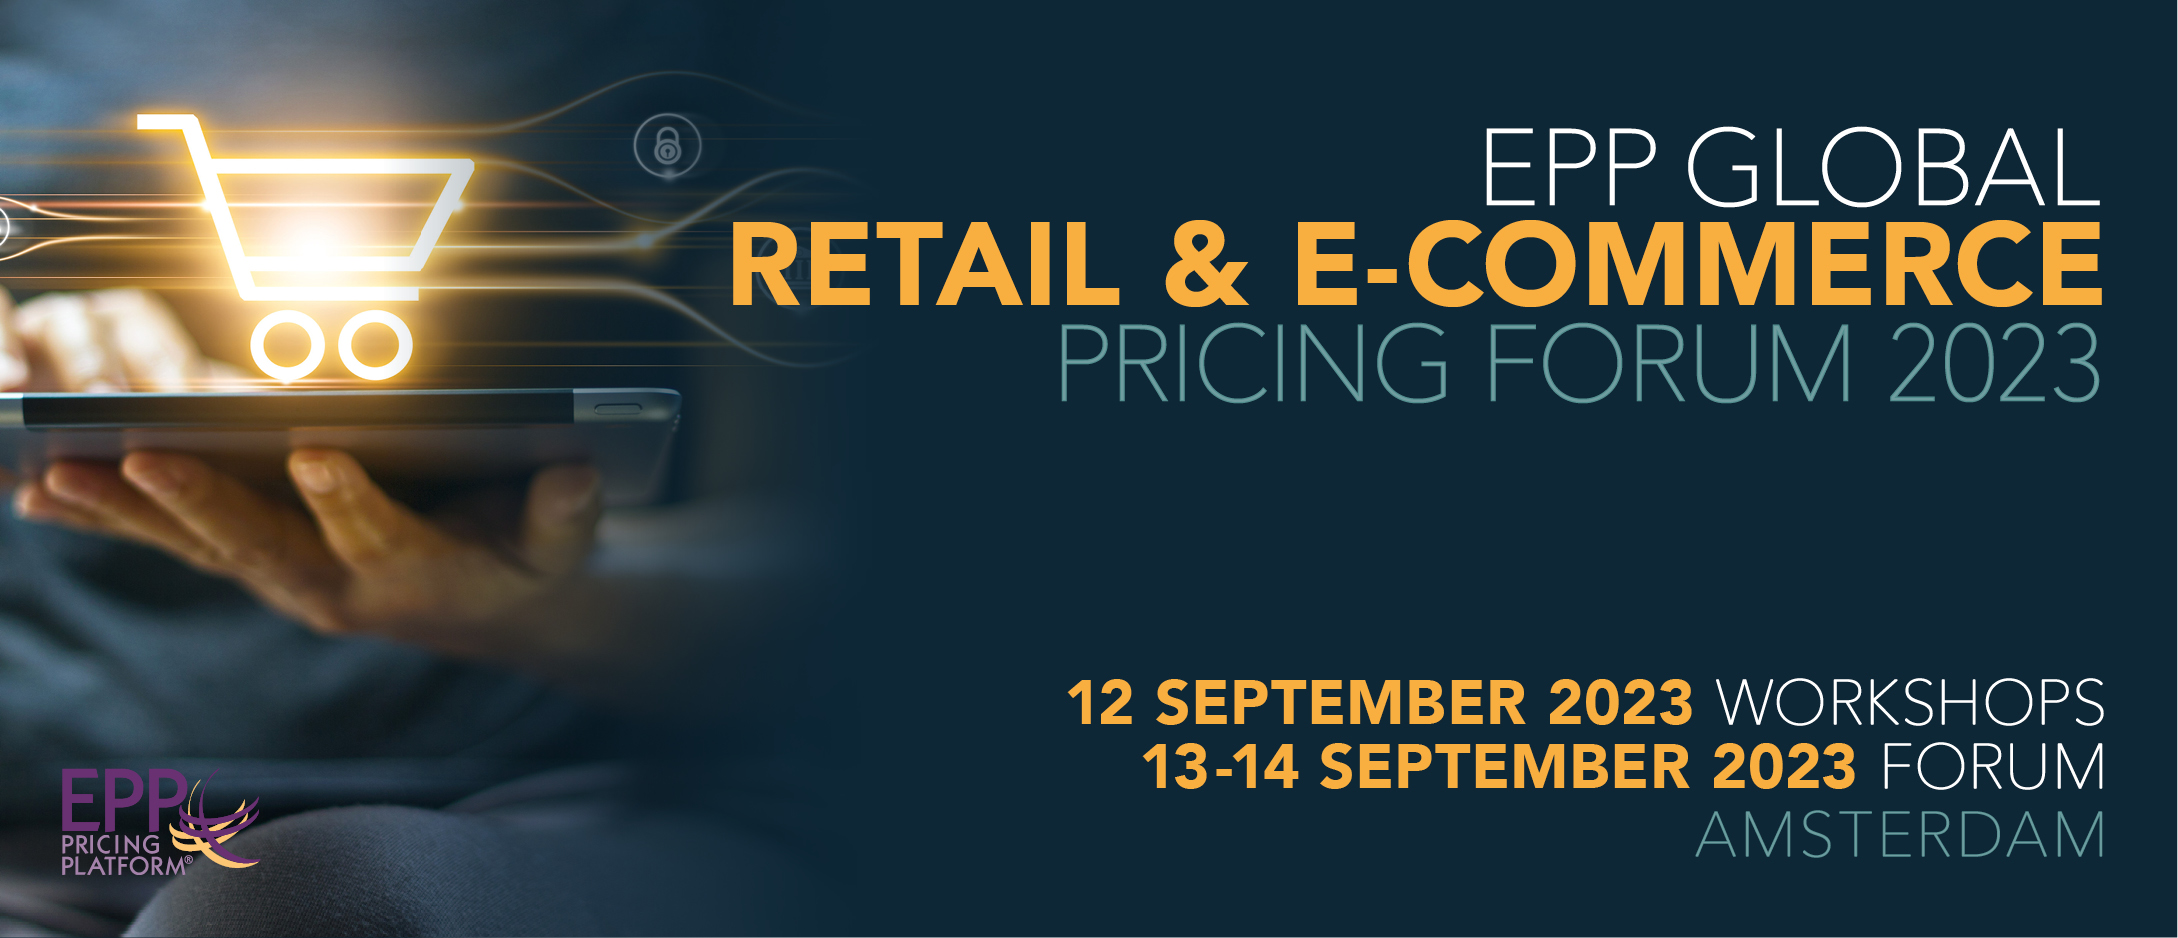 EPP Global Retail and E-commerce Pricing Forum 2023